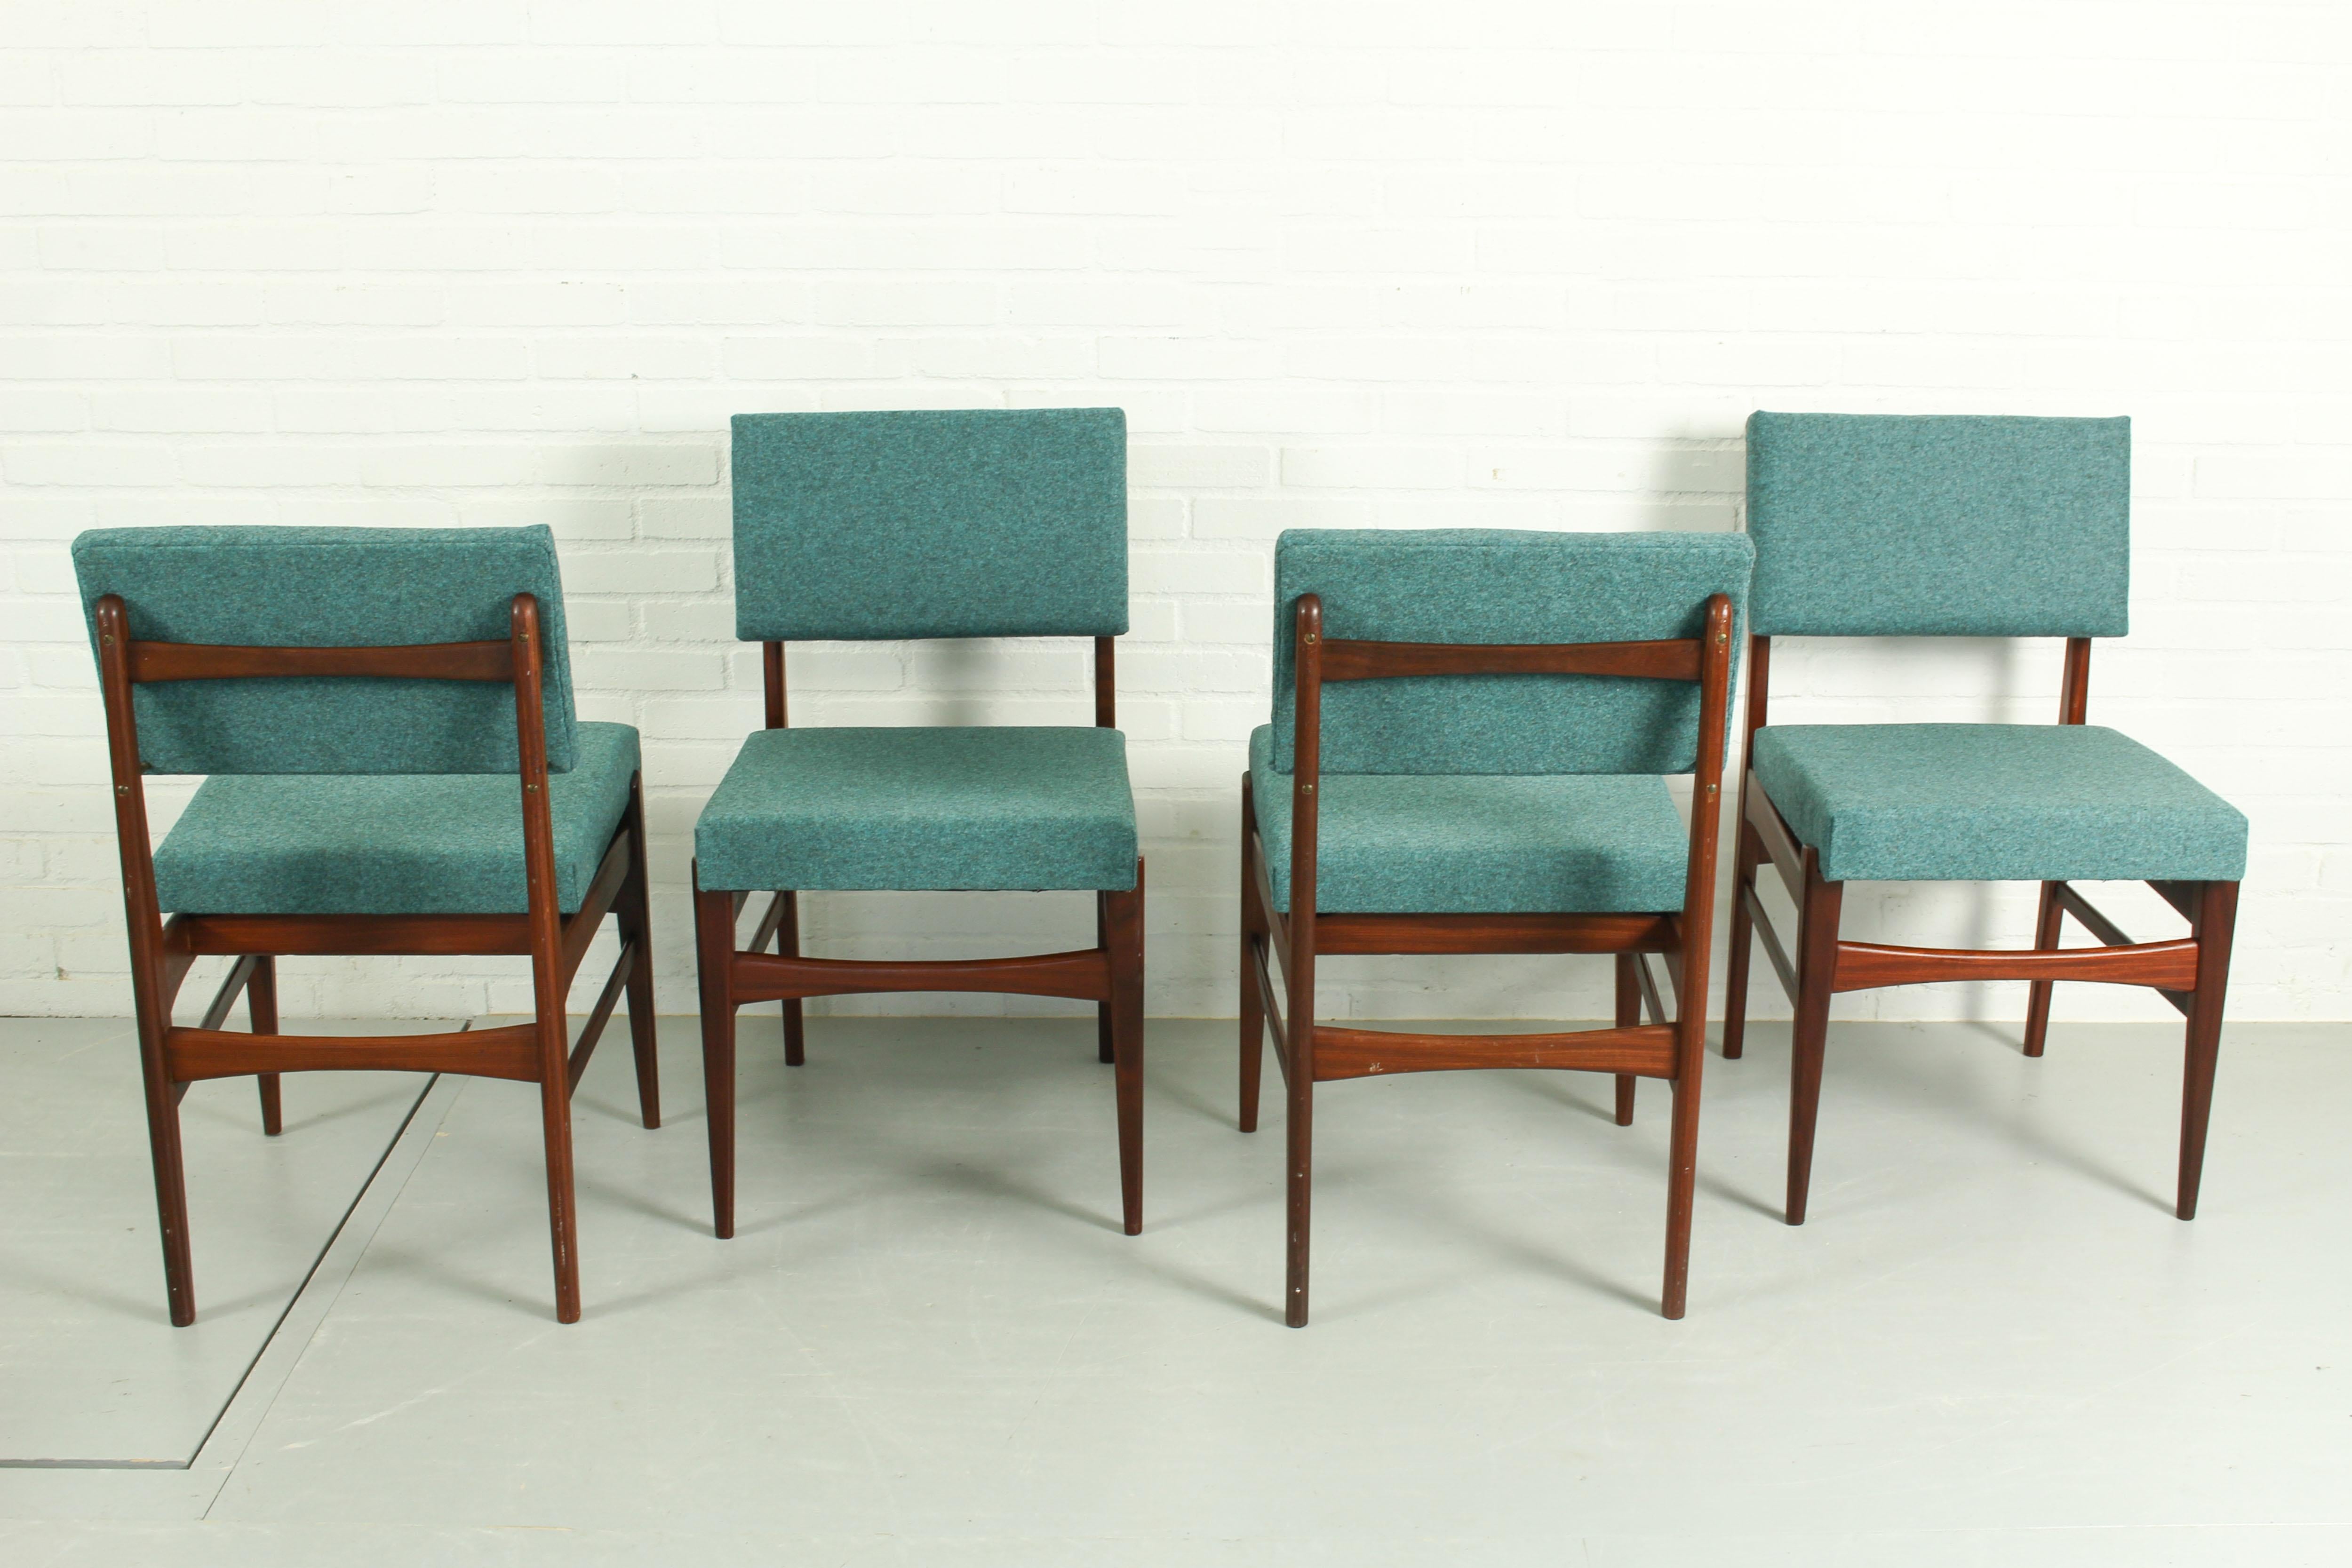 Mid-Century Modern Dining chairs and Dining Table by Louis van Teeffelen for Wébé, The Netherlands  For Sale